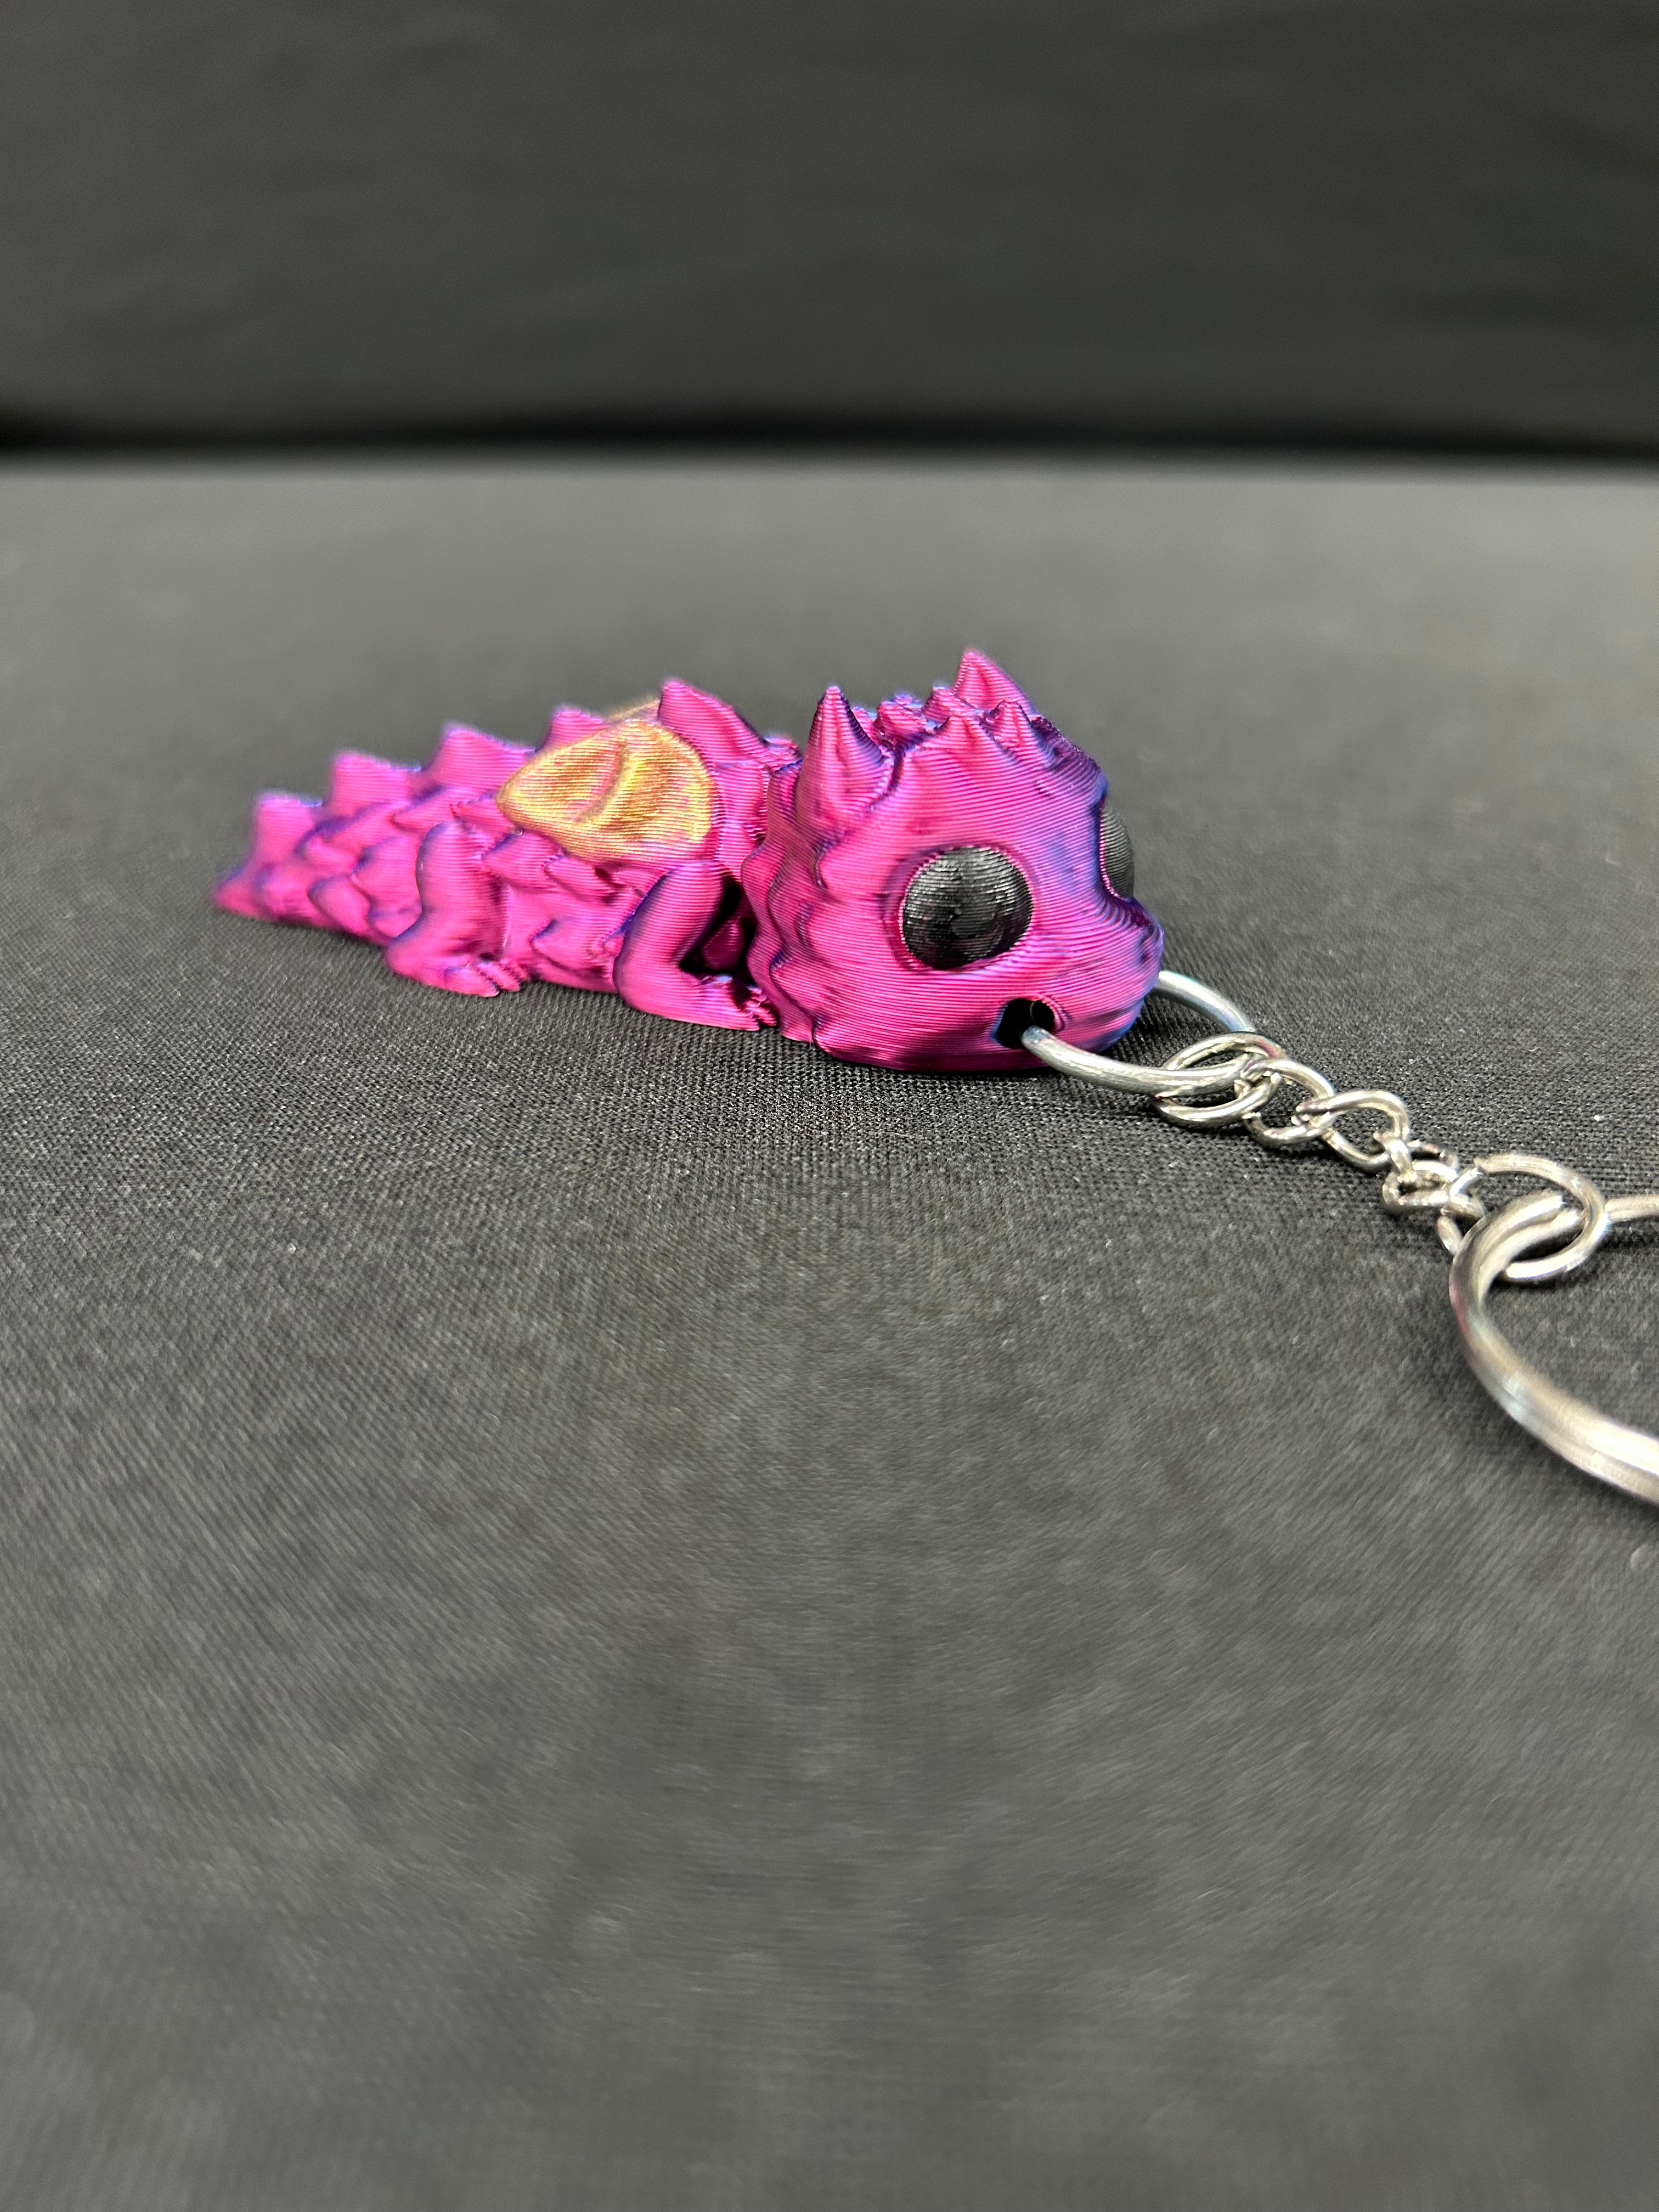 Baby Dragon B Keychain - 3D model by Built Over Bot on Thangs